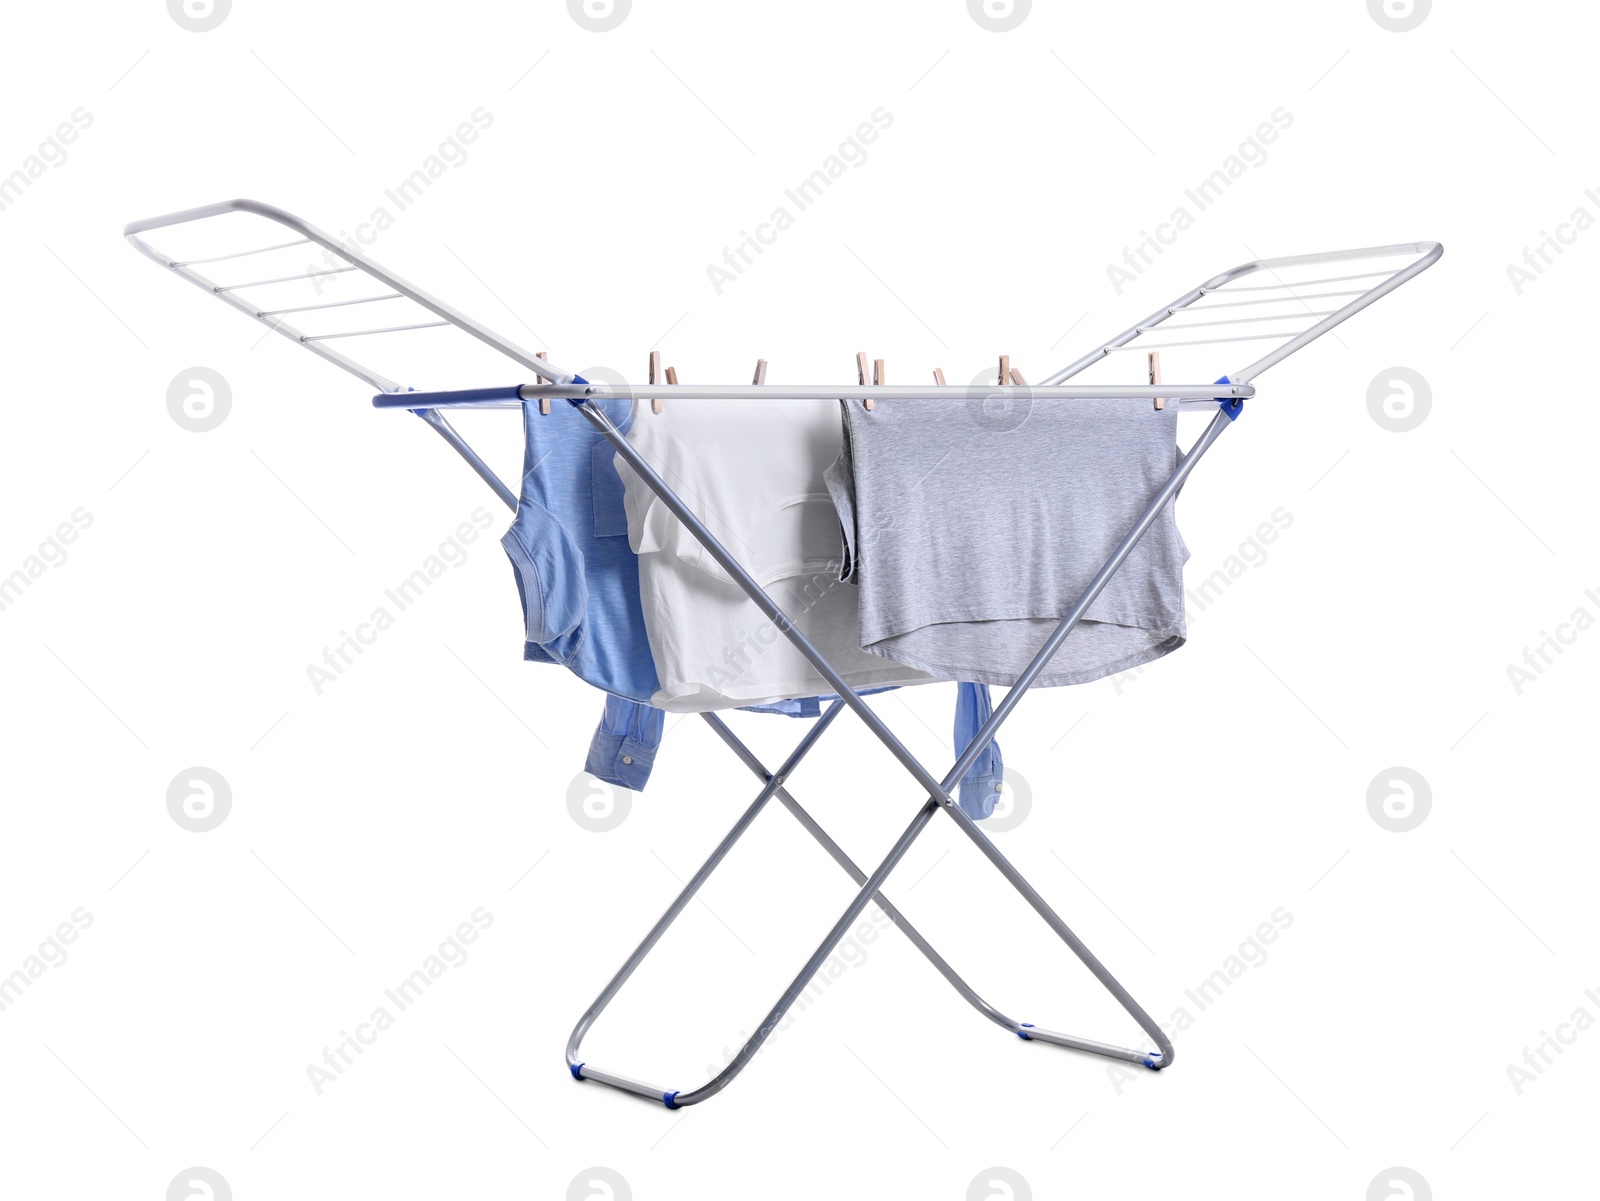 Photo of Clean laundry hanging on drying rack against white background